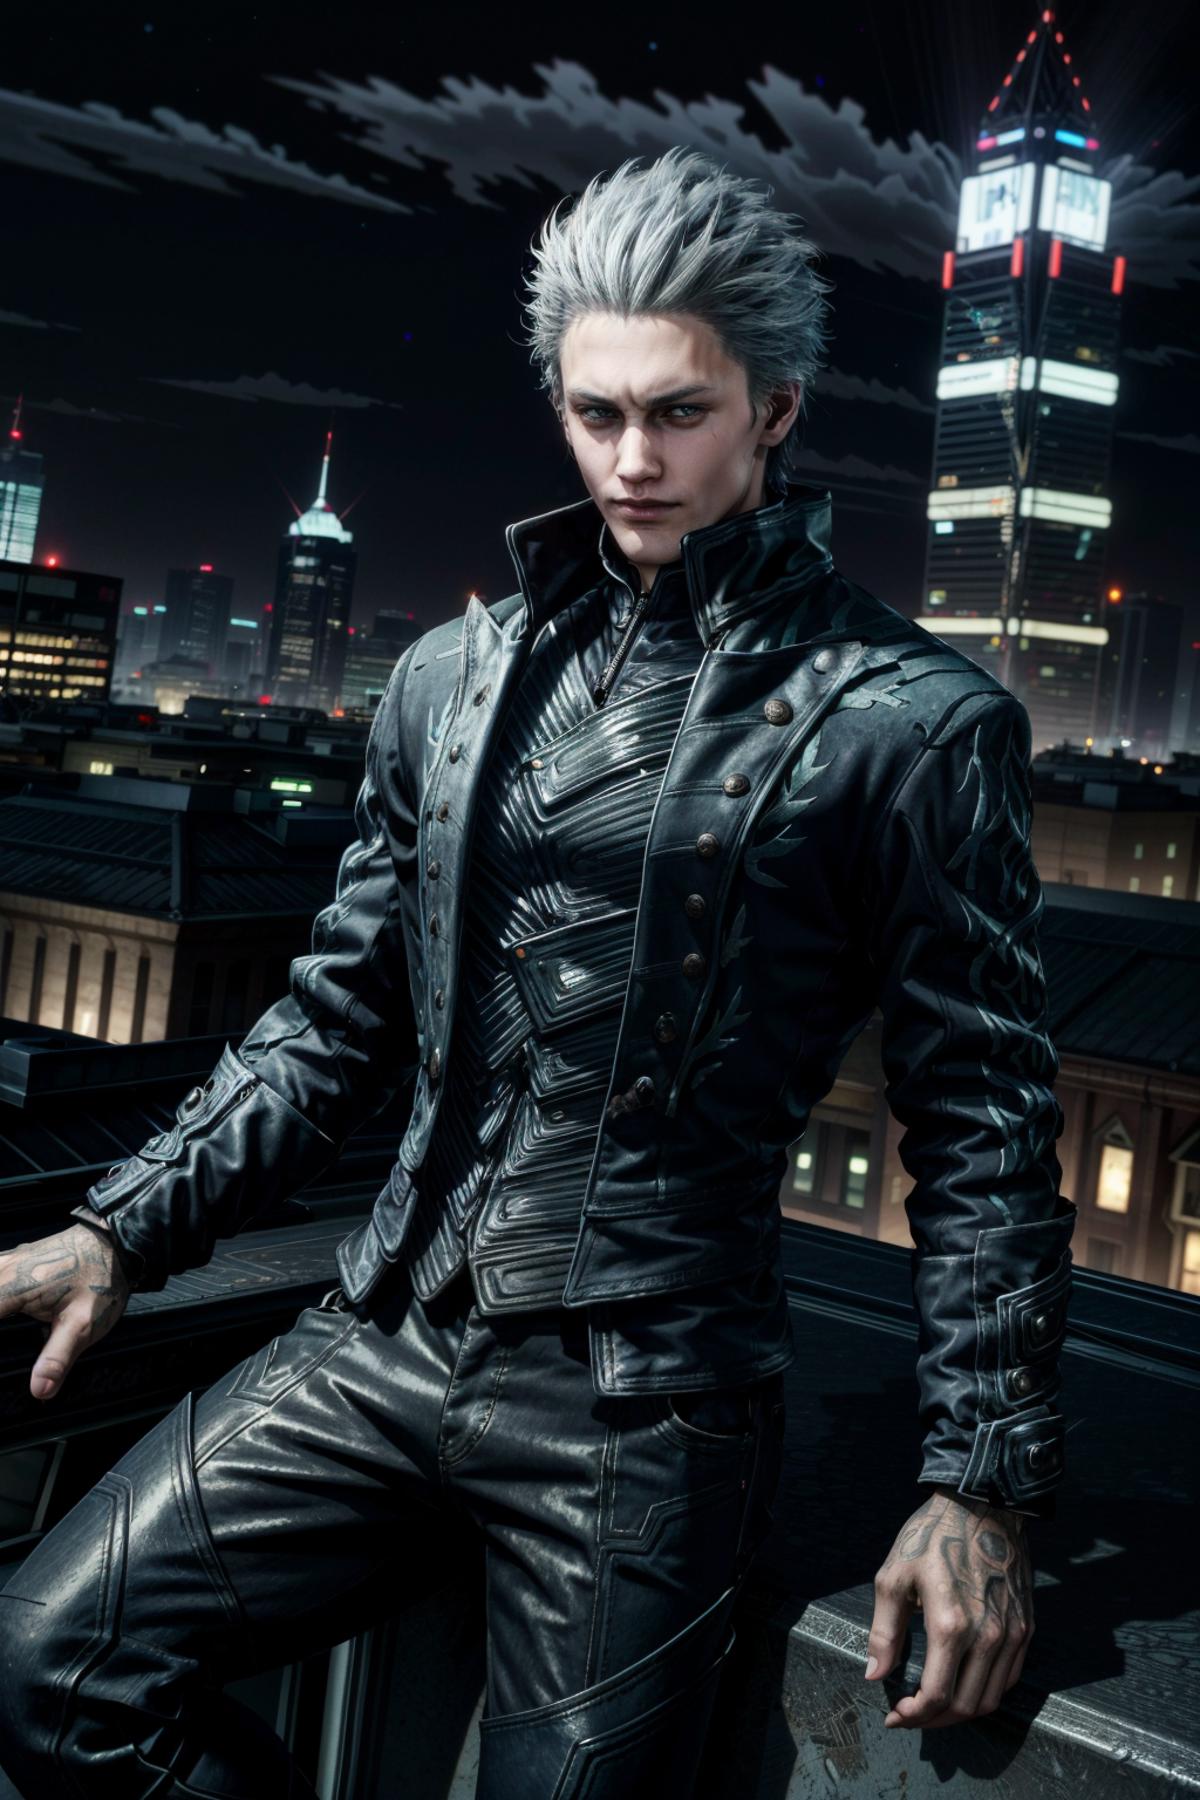 Vergil from Devil May Cry 5 image by BloodRedKittie